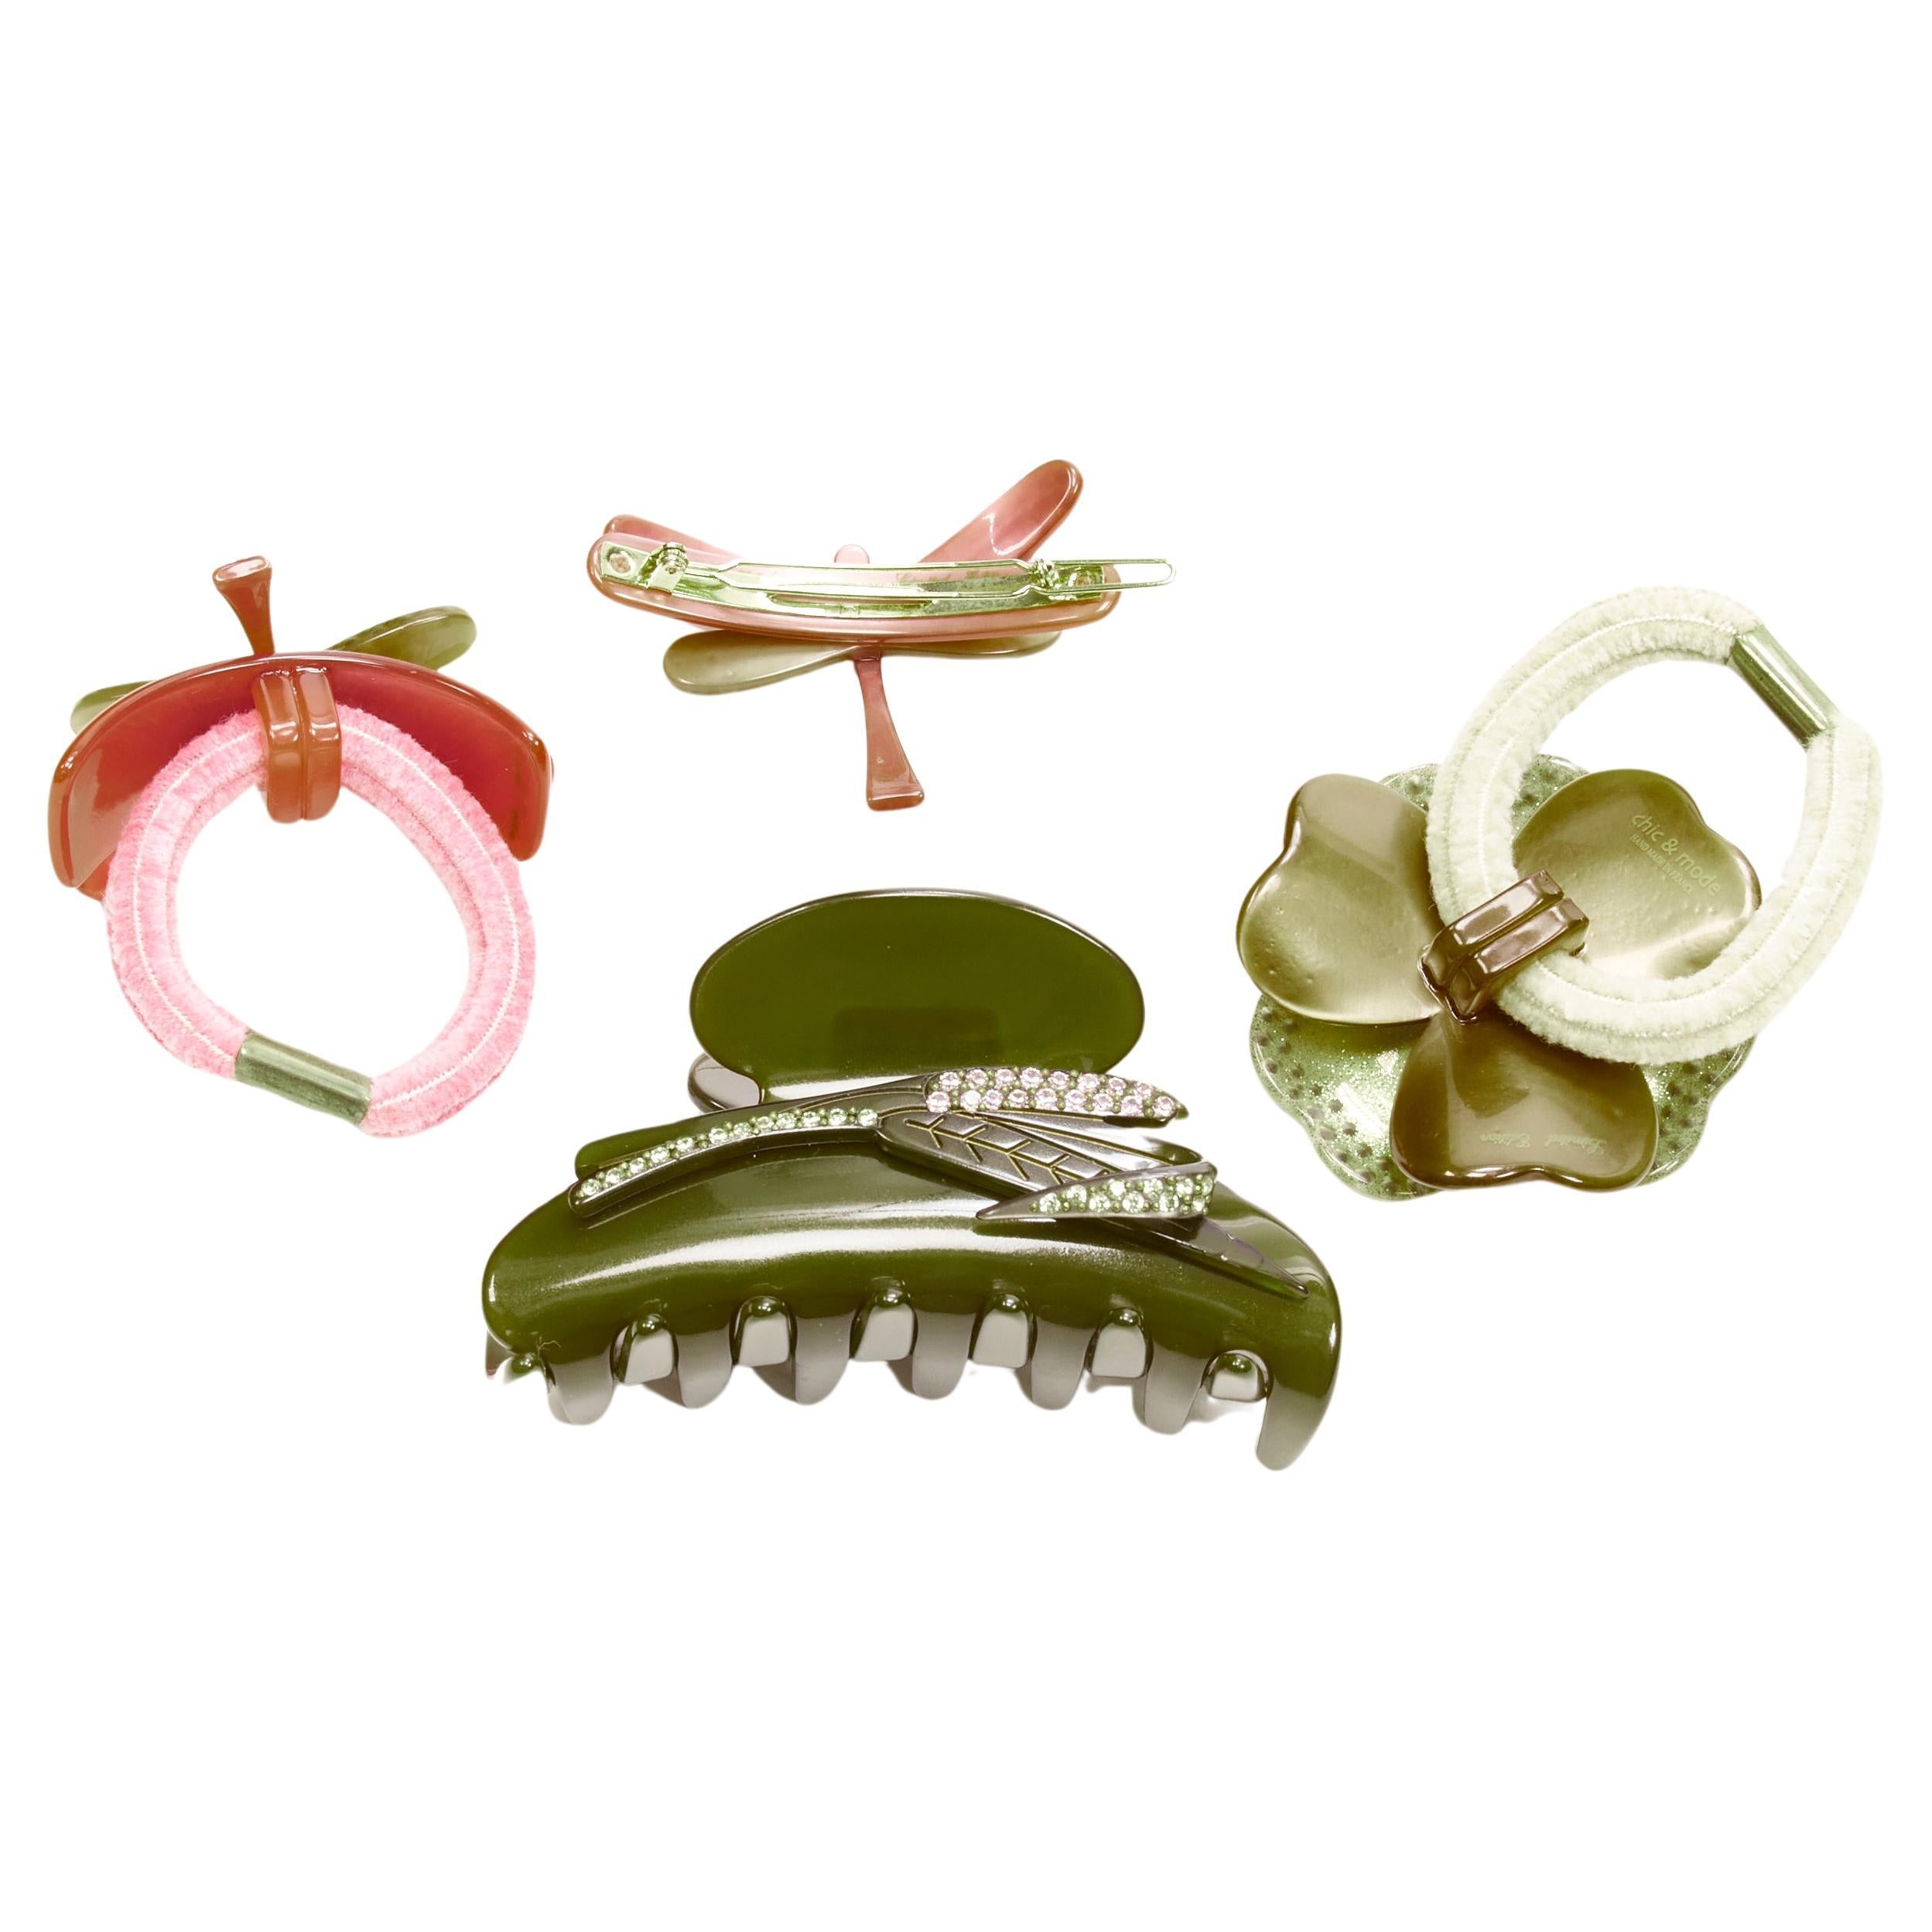 CHIC & MODE Alexandre Zouari pink green dragonfly flower hair clamp clip tie X4